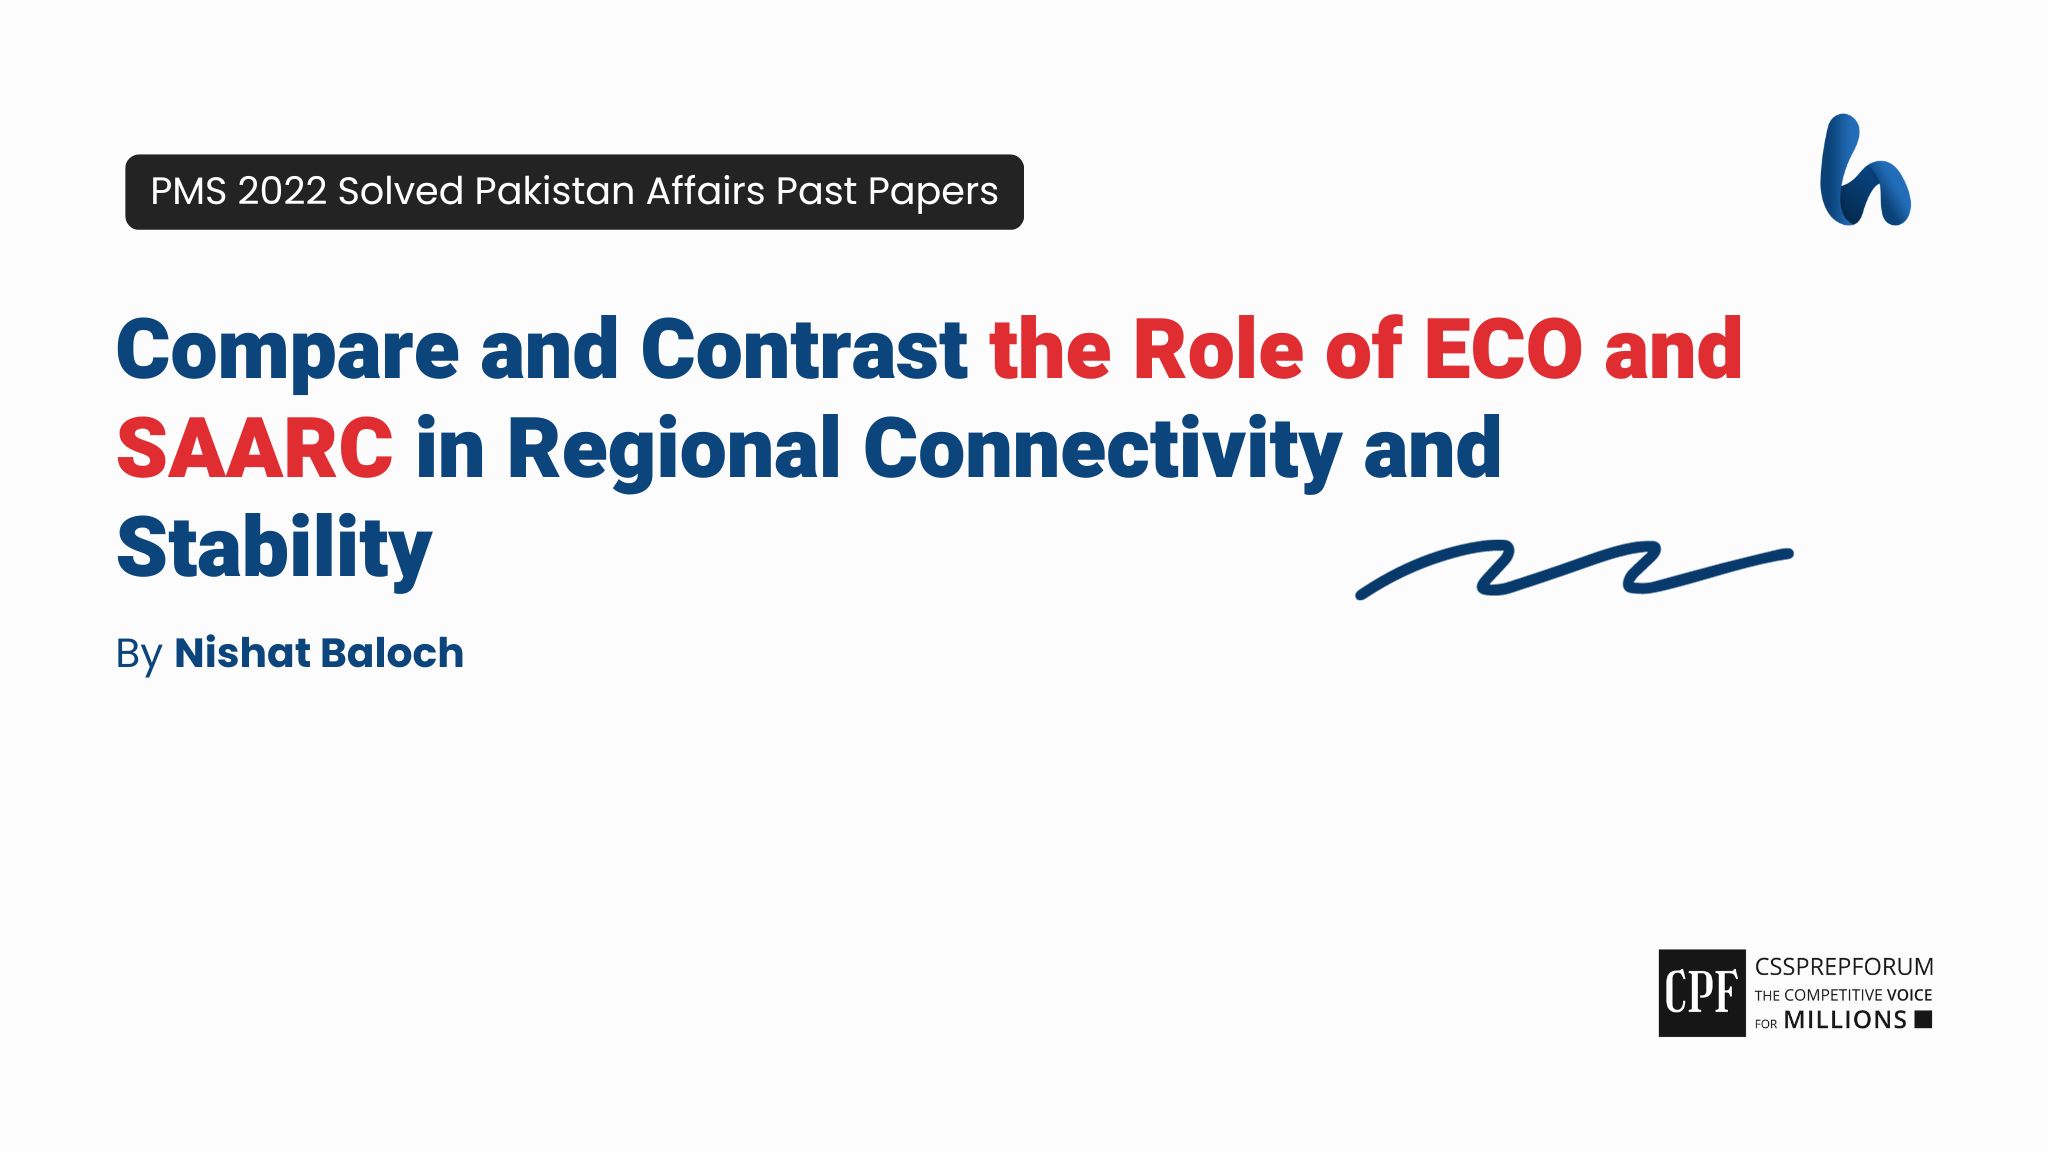 Compare and Contrast the Role of ECO and SAARC in Regional Connectivity and Stability